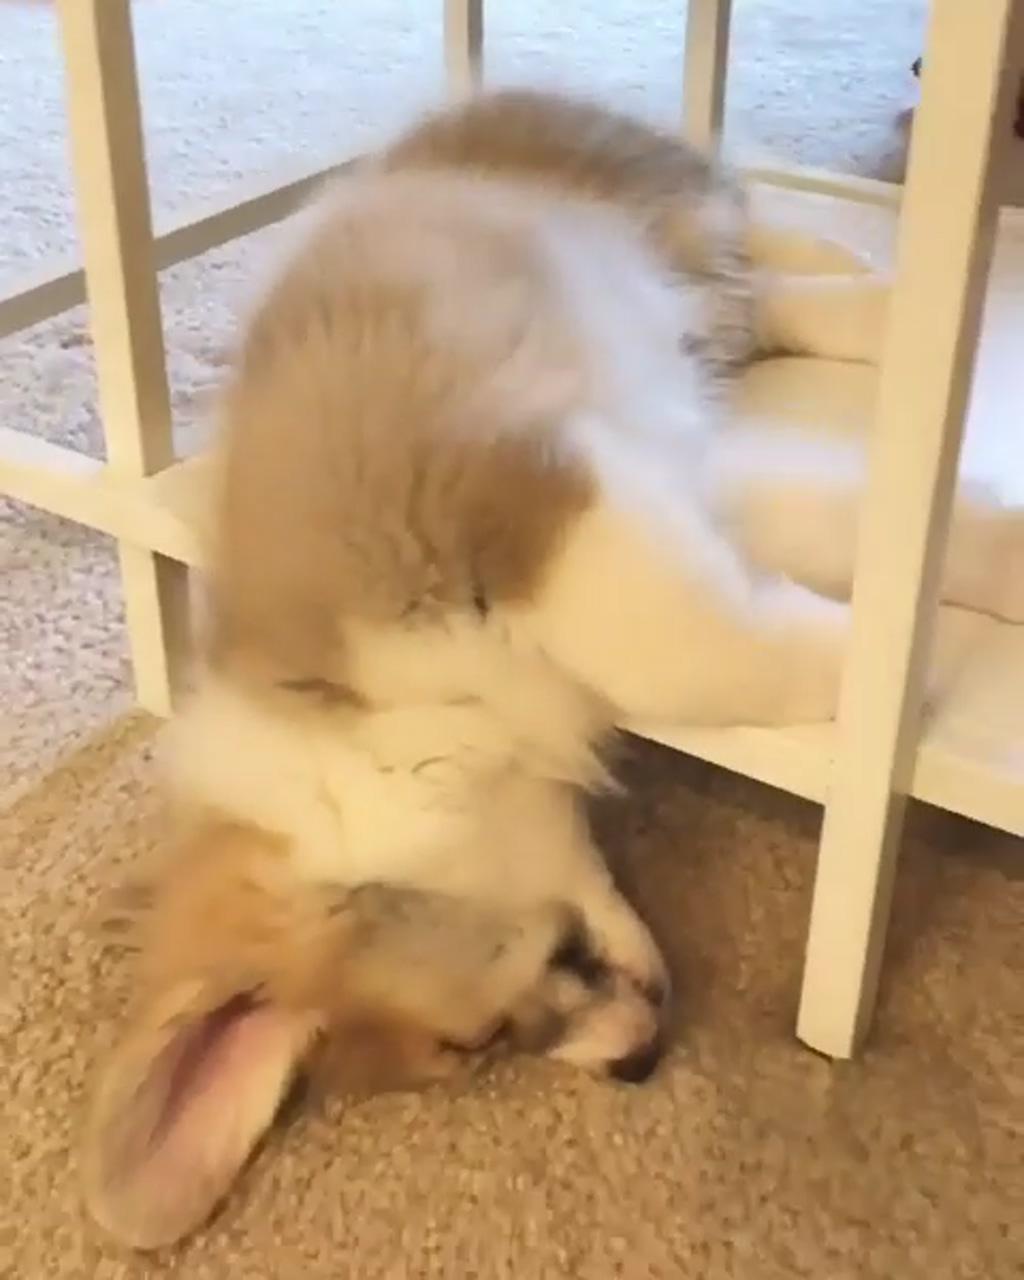 This is why we say "fall asleep"; corgi dogs happy